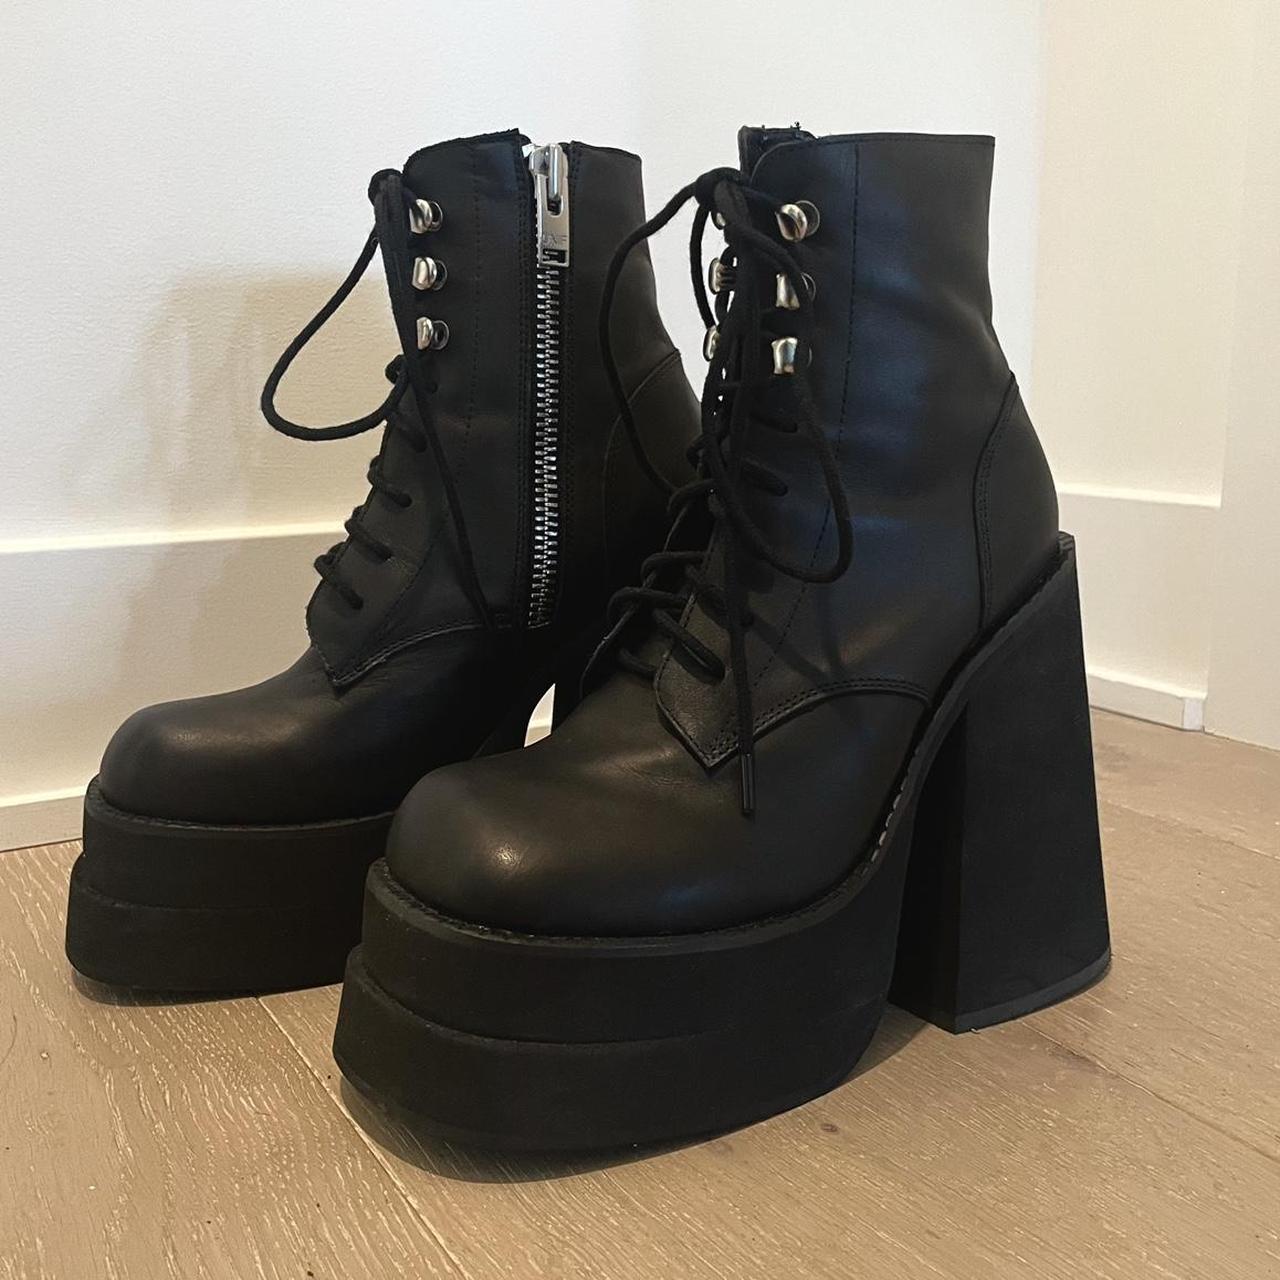 UNIF Brat boot. Bought for $188, worn once and in... - Depop